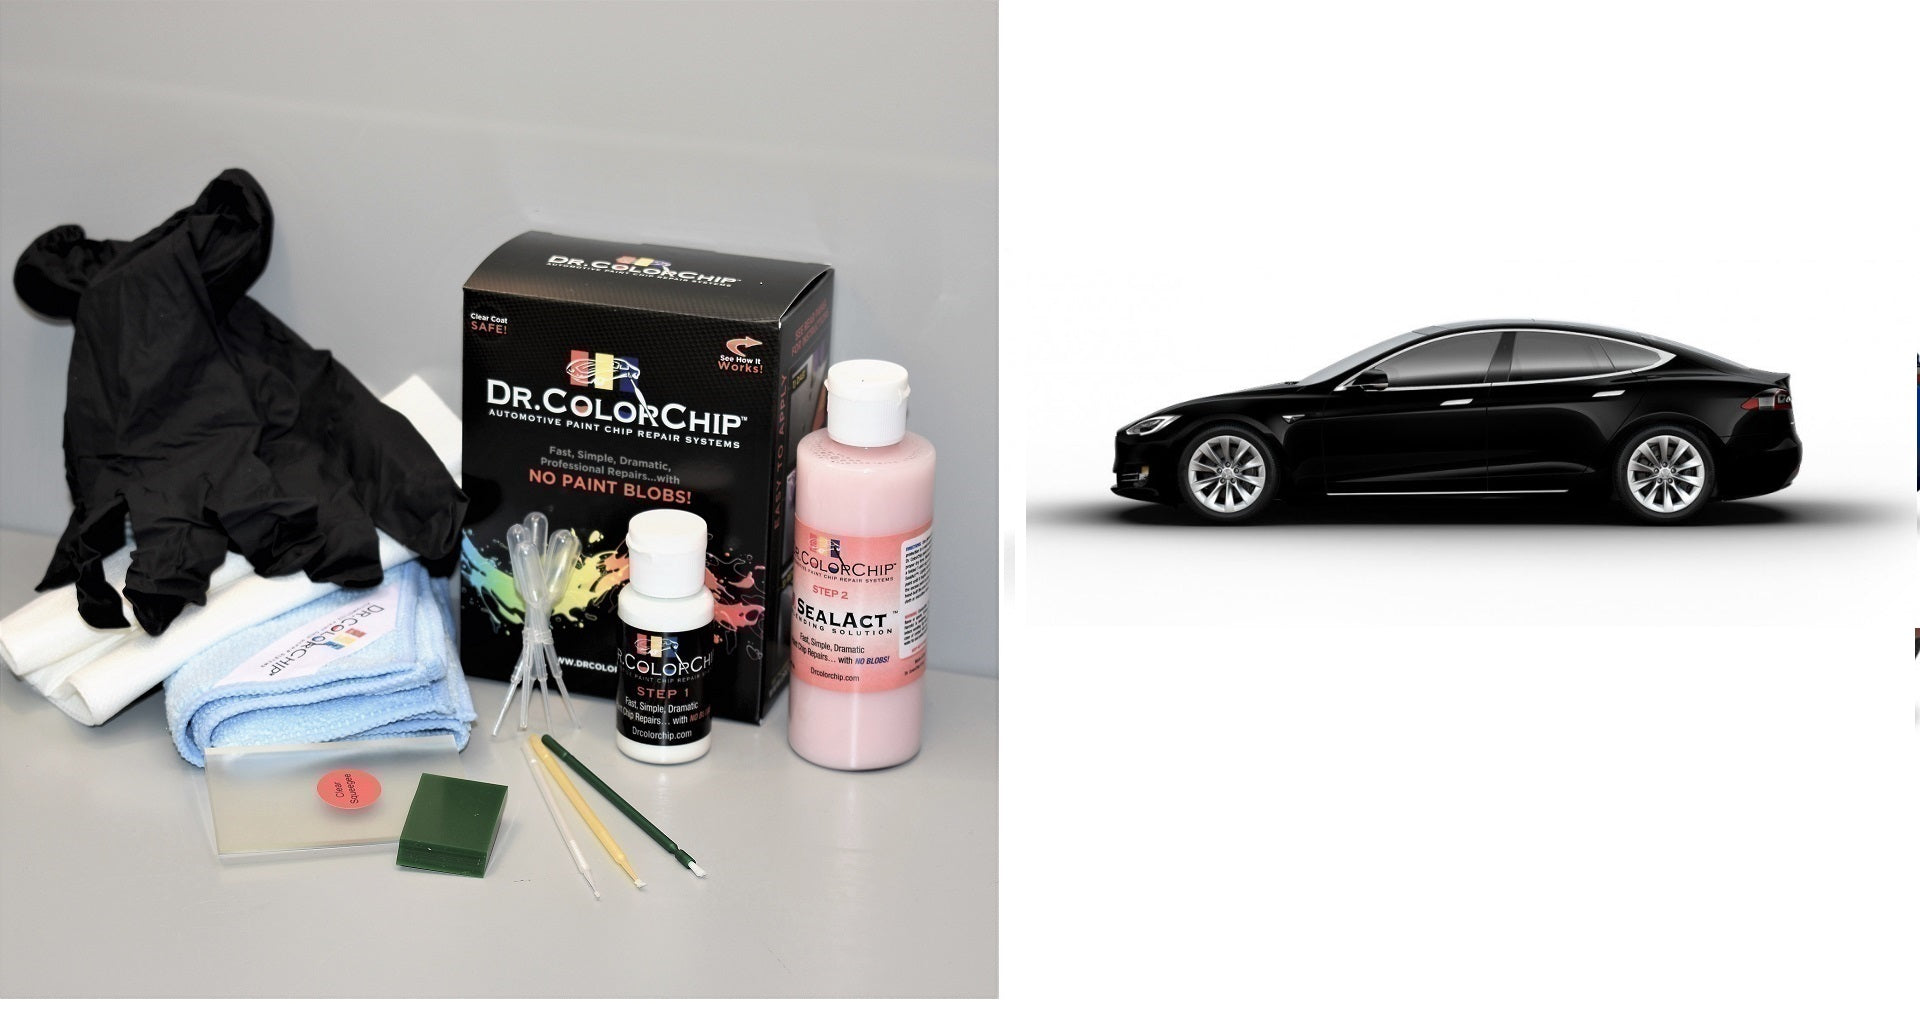 Tesla Model 3 Exterior Touch Up Paint Kit, Dr Color Chip, Squirt 'n Sq